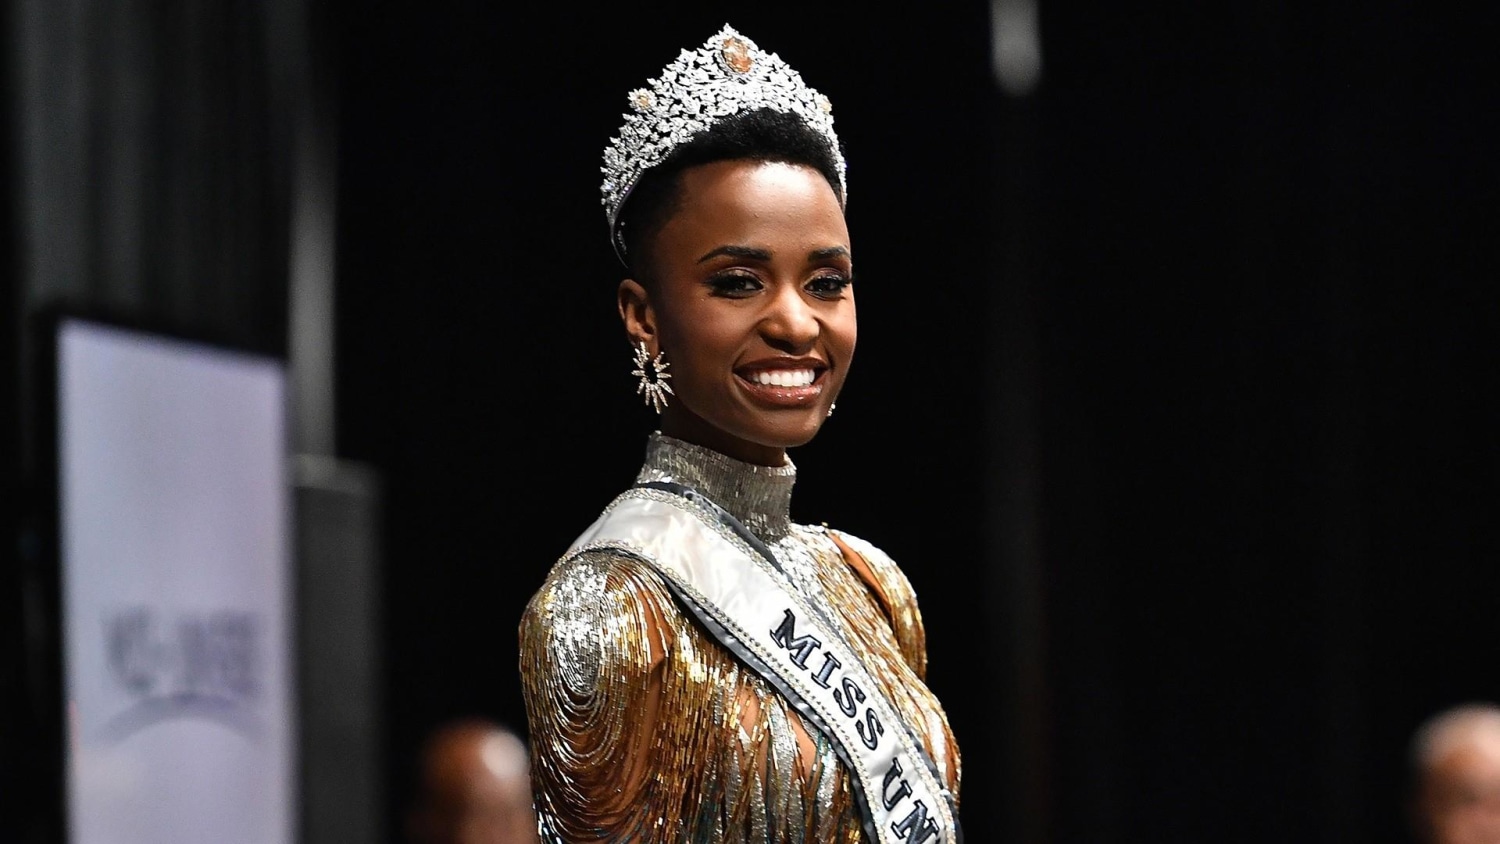 4 major pageant winners are all black women for the first time